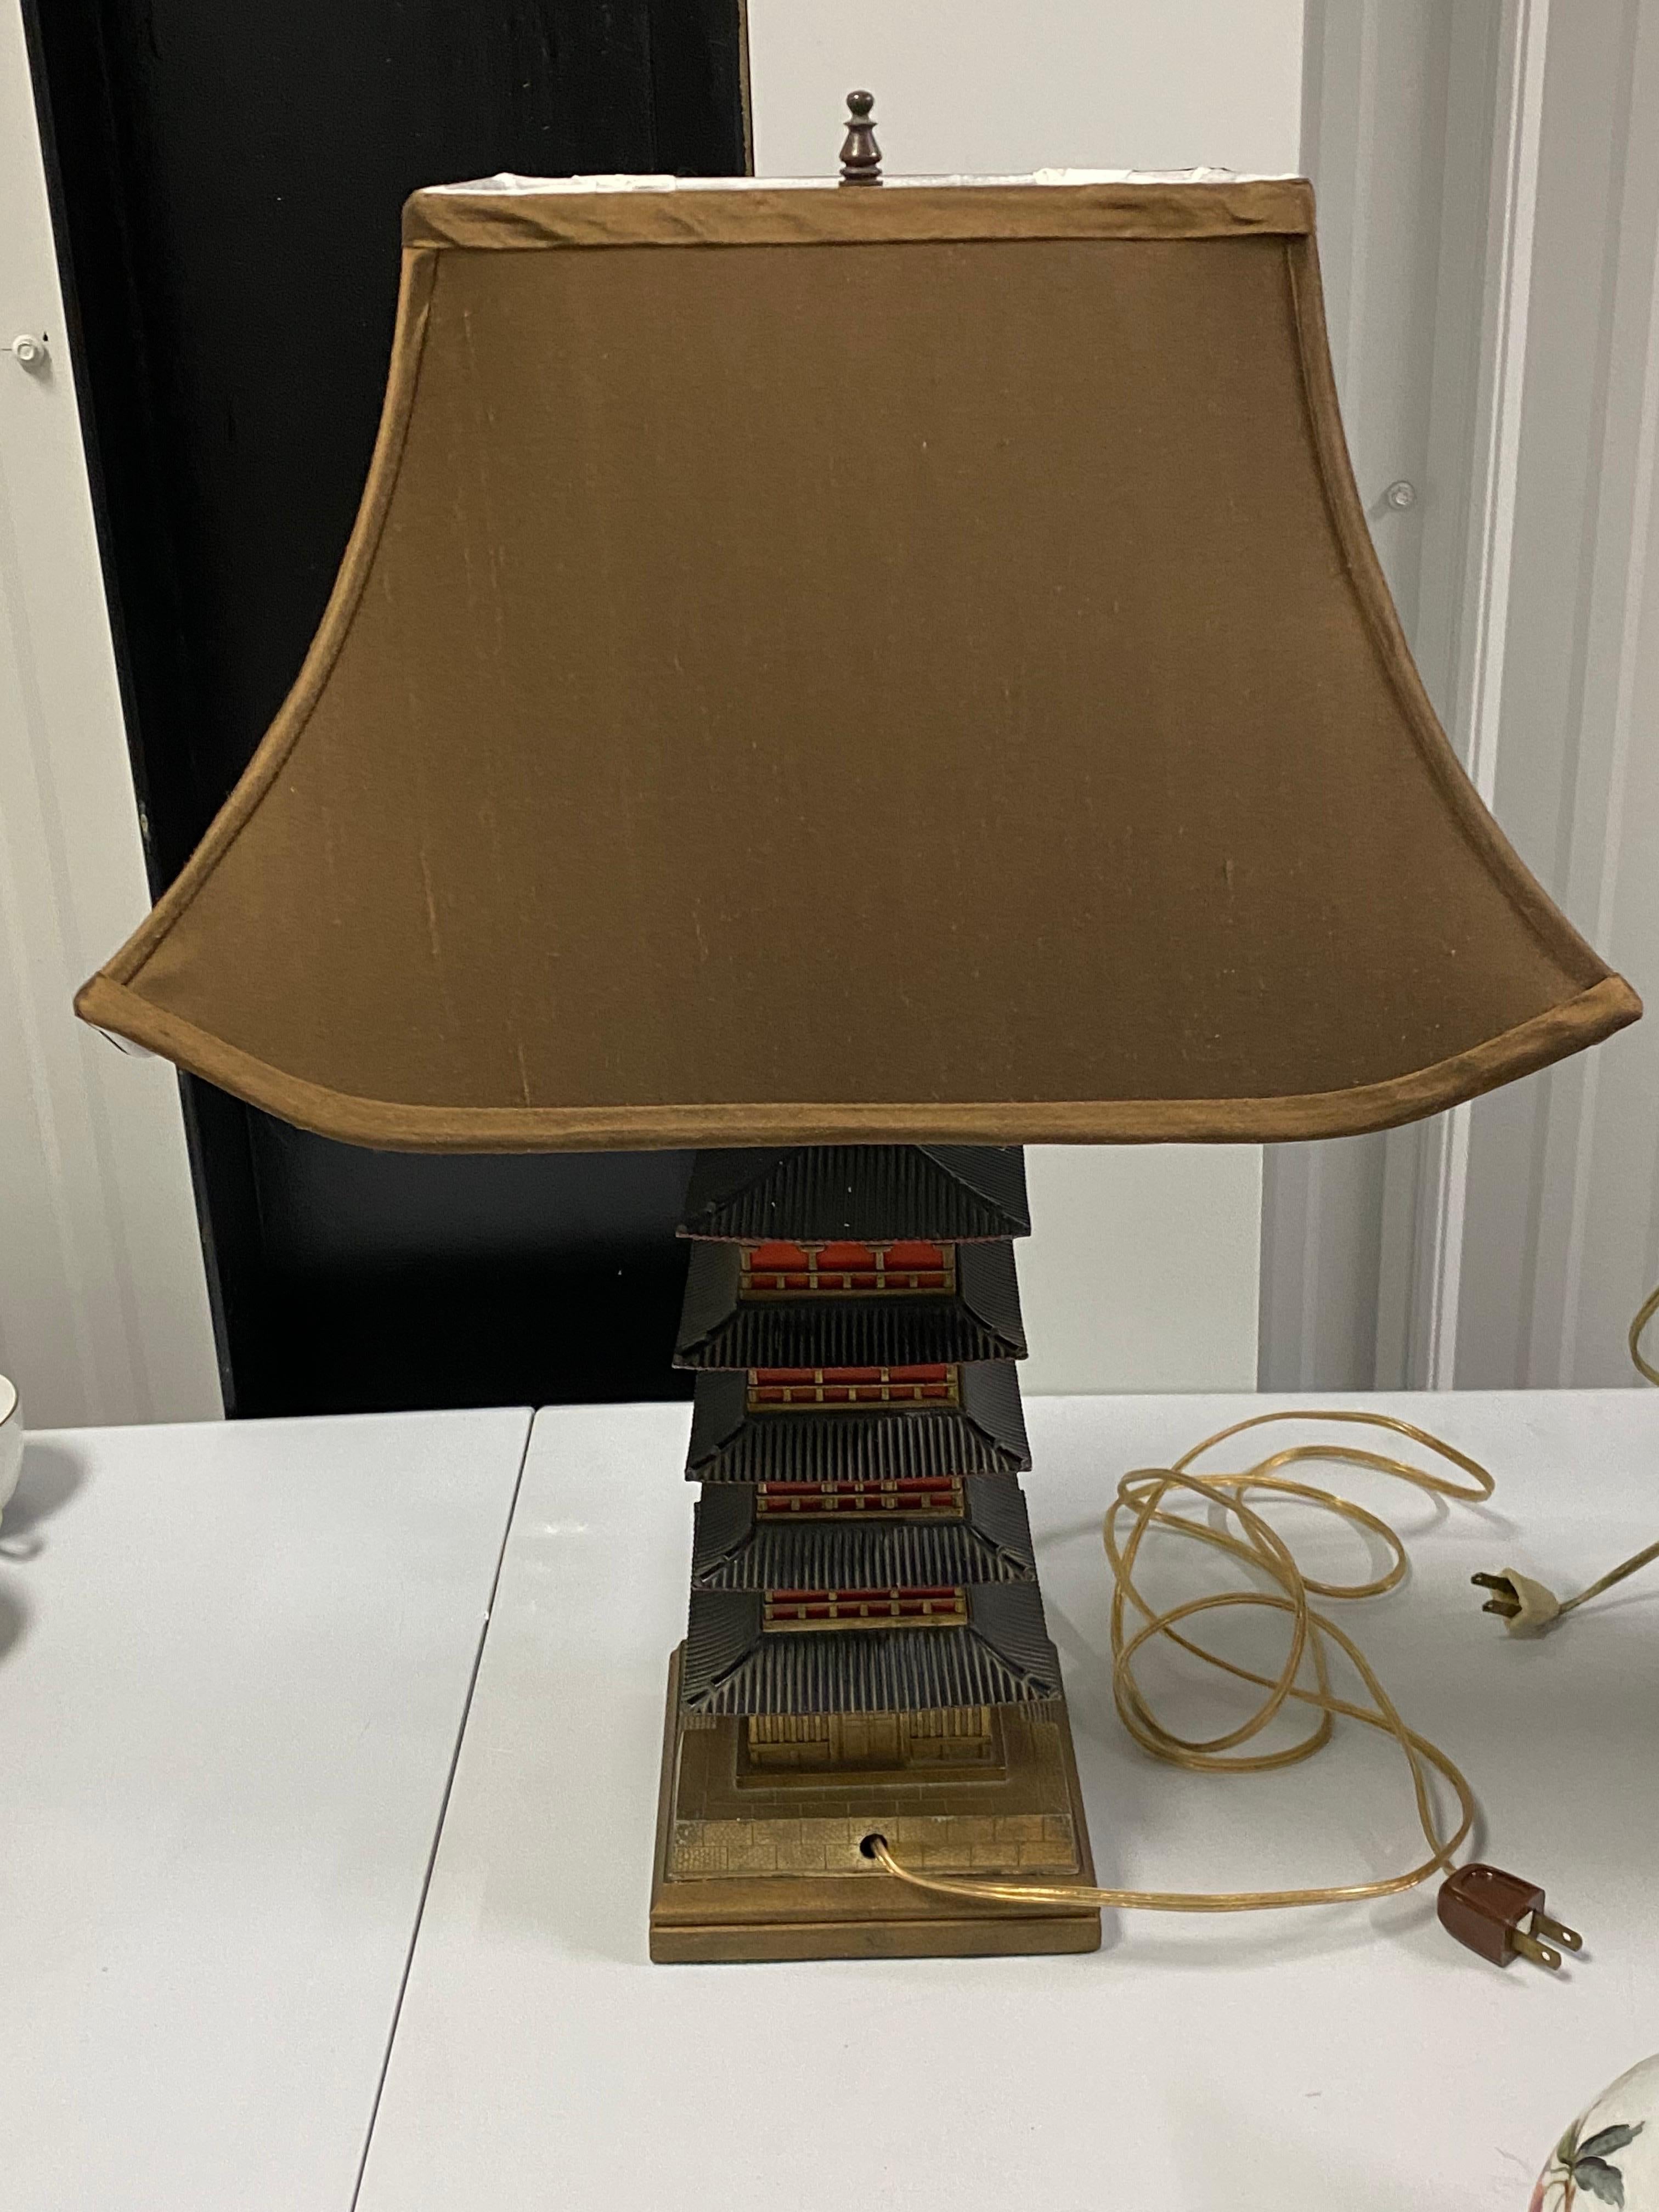 Japanese Style Art Deco Pagoda Lamp, 20th Century
A bronze & brass Japanese Style Pagoda Lamp, 20th Century. Knob on base moves to the right to illuminate. Column illuminates to a brilliant red color.  Interesting architectural pagoda. Good working